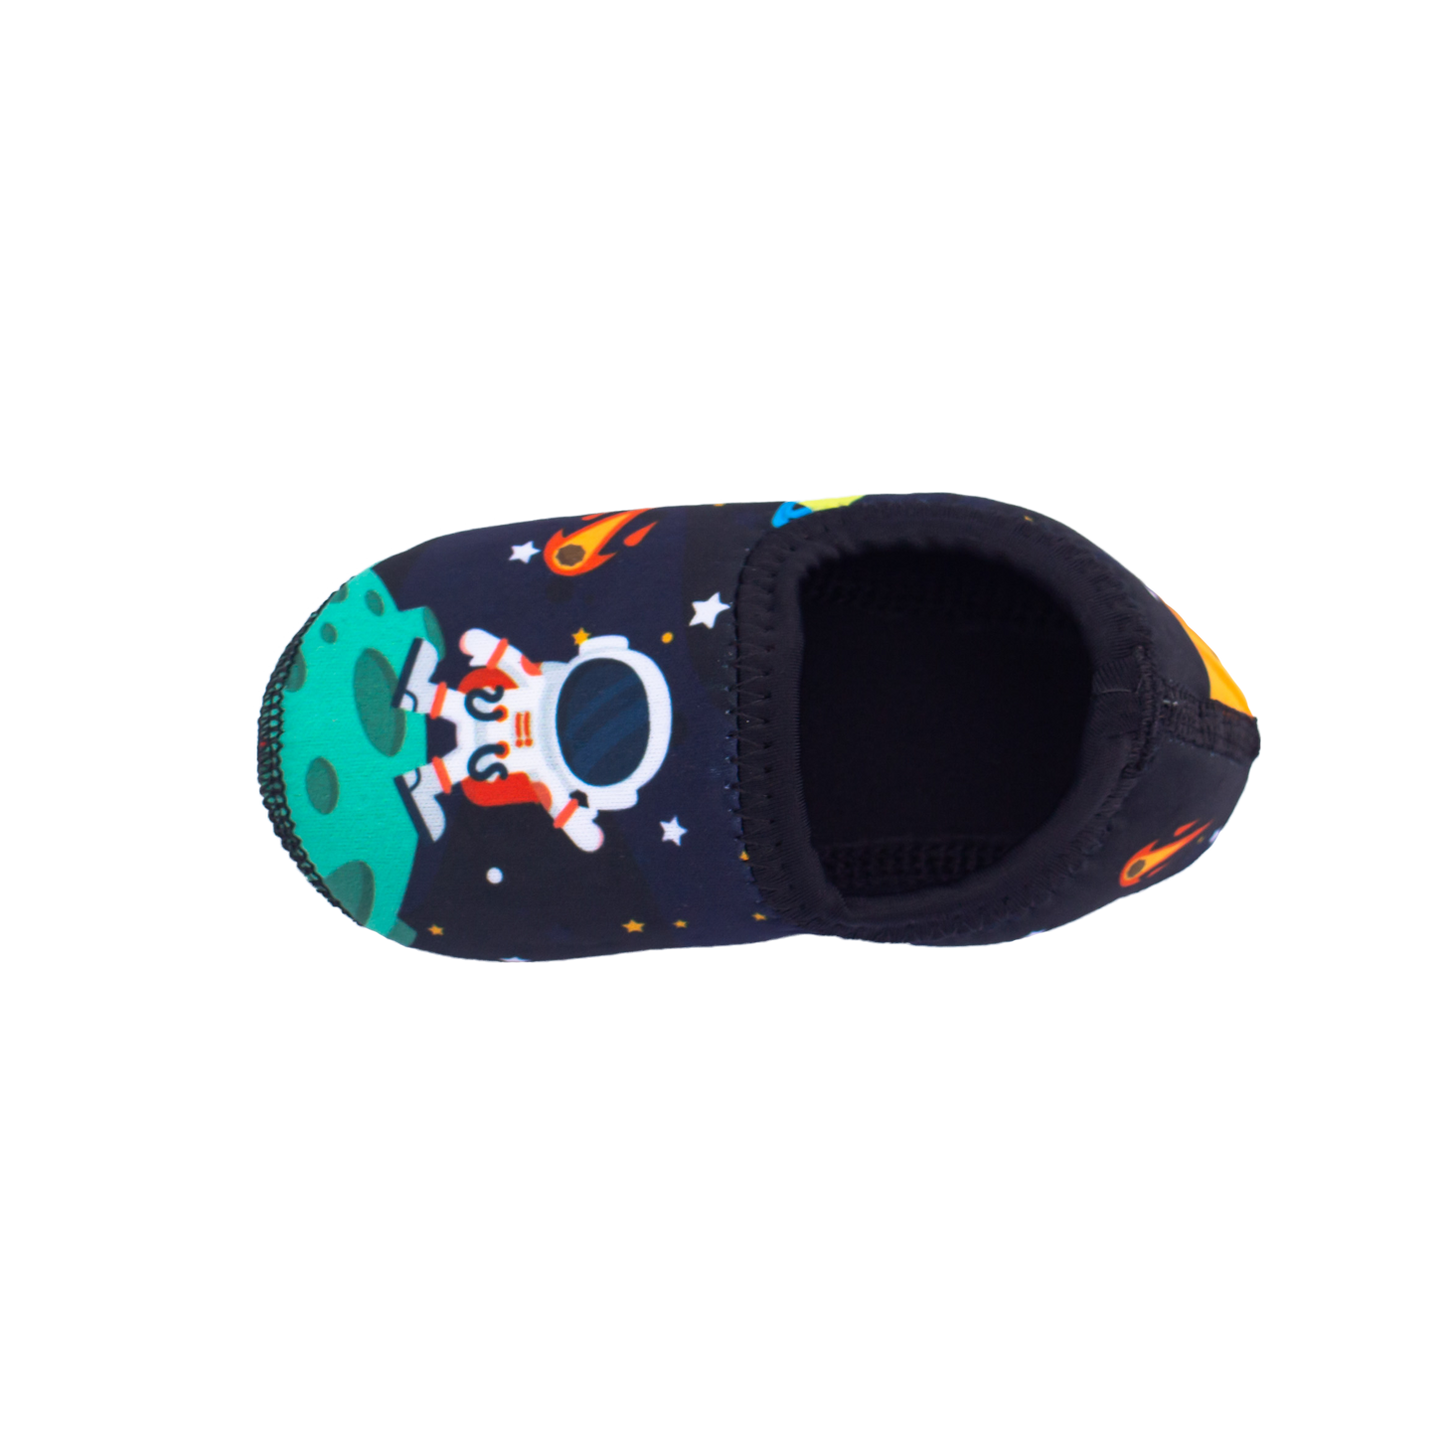 Ufrog Water Shoes - Astroboy